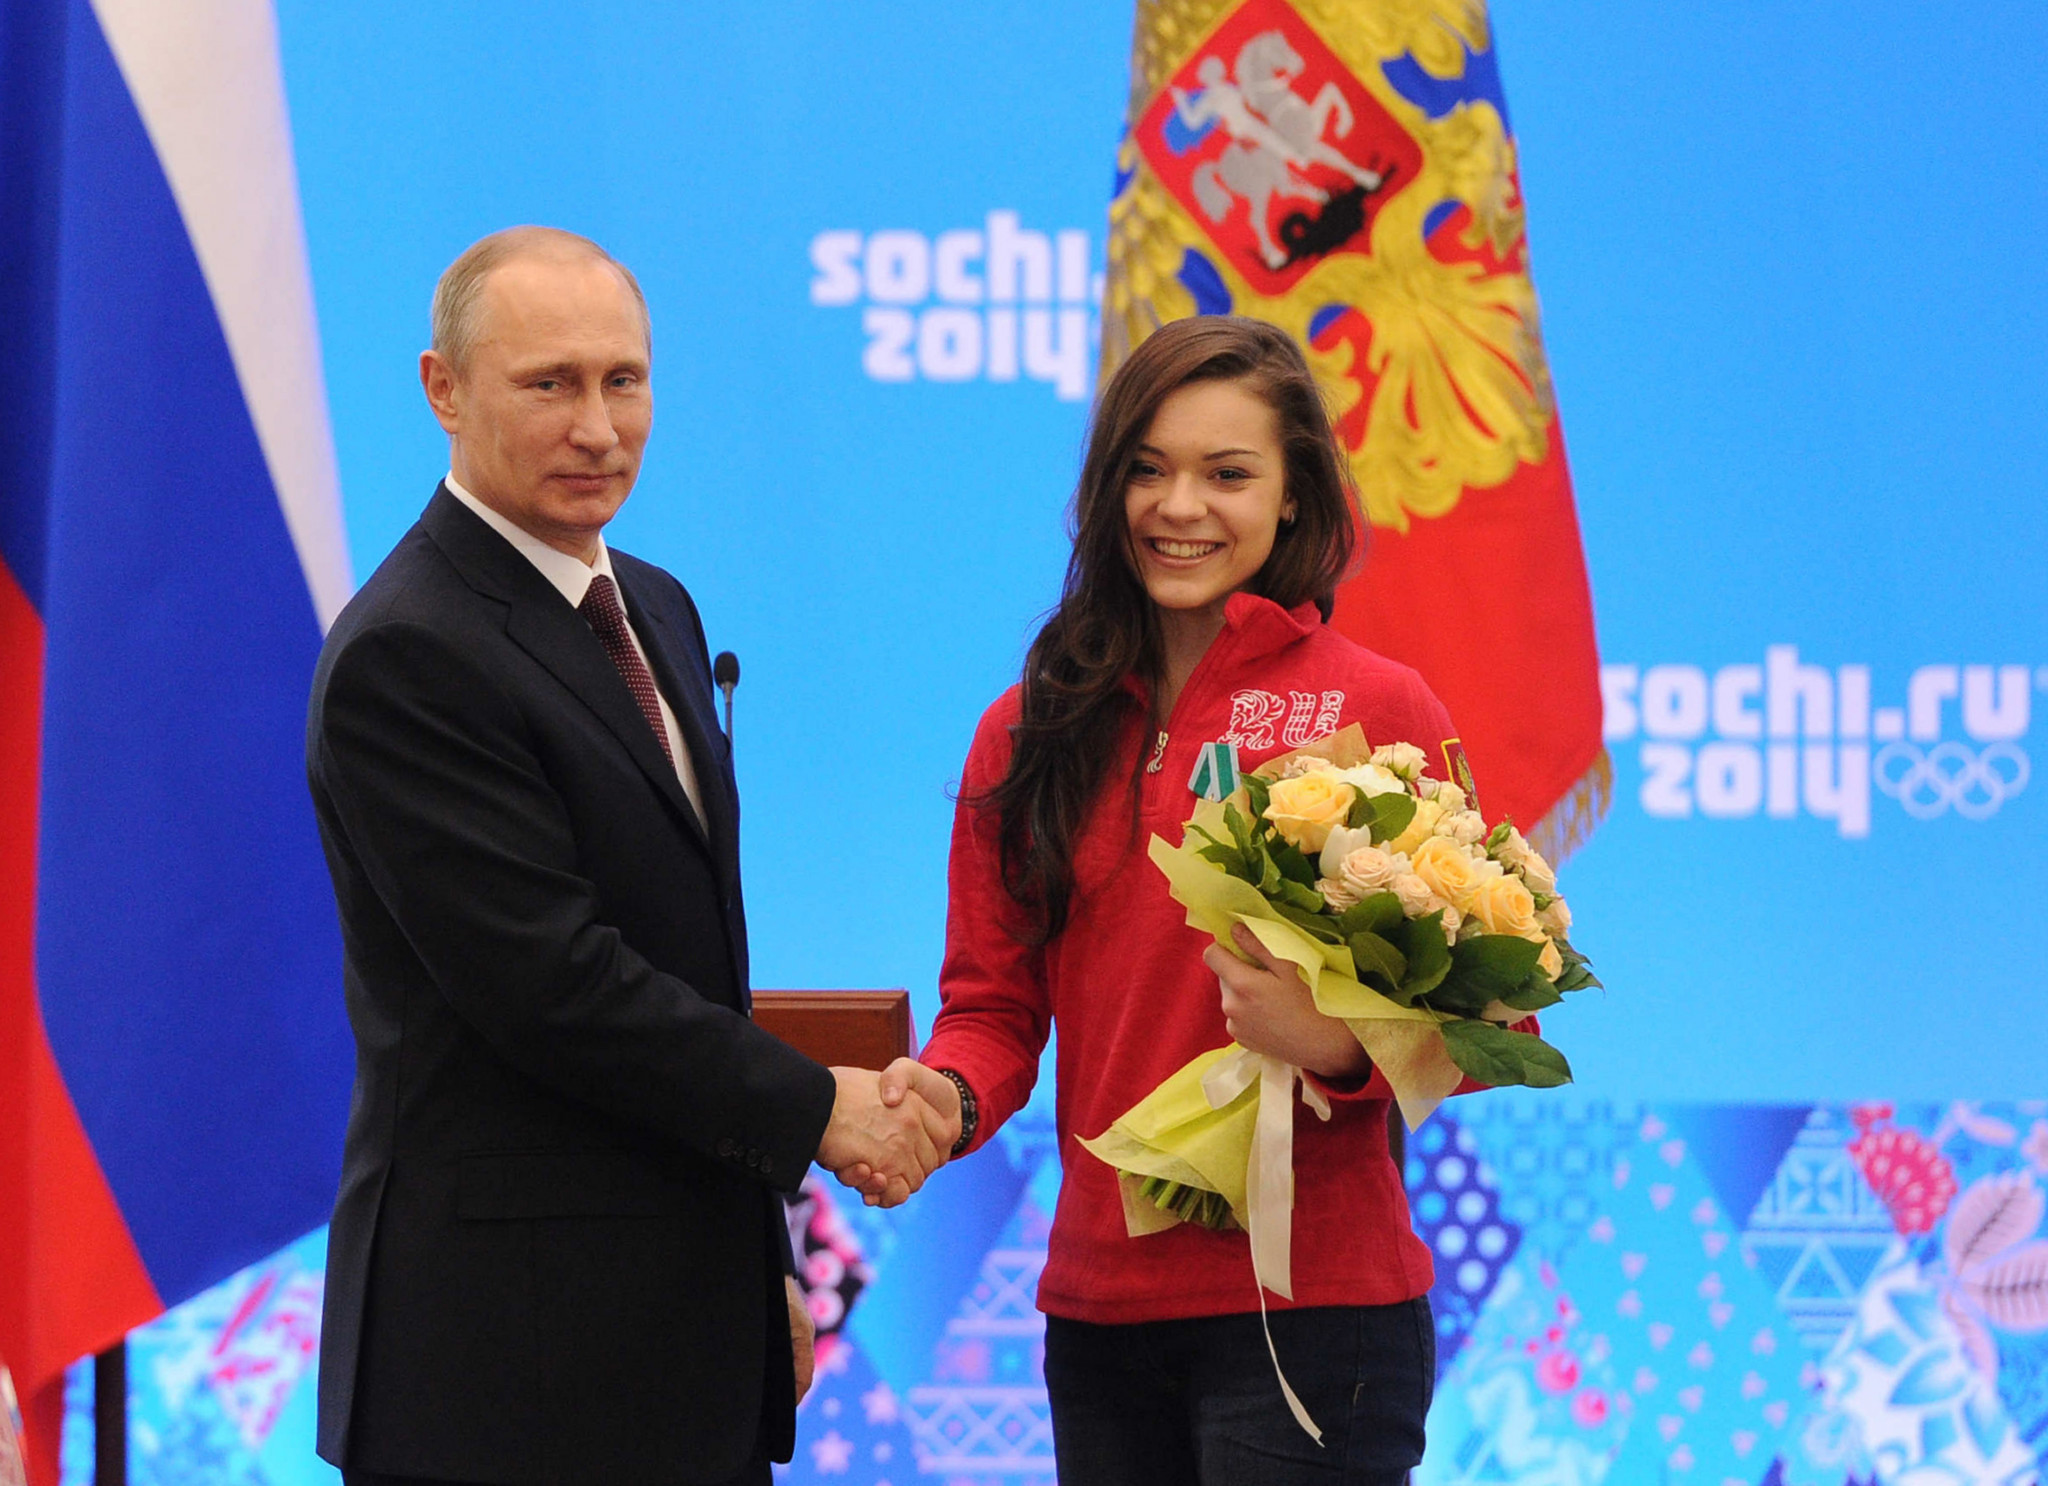 Adelina Sotnikova, right, pictured celebrating with Vladimir Putin after her figure skating victory at Sochi 2014 ©Getty Images